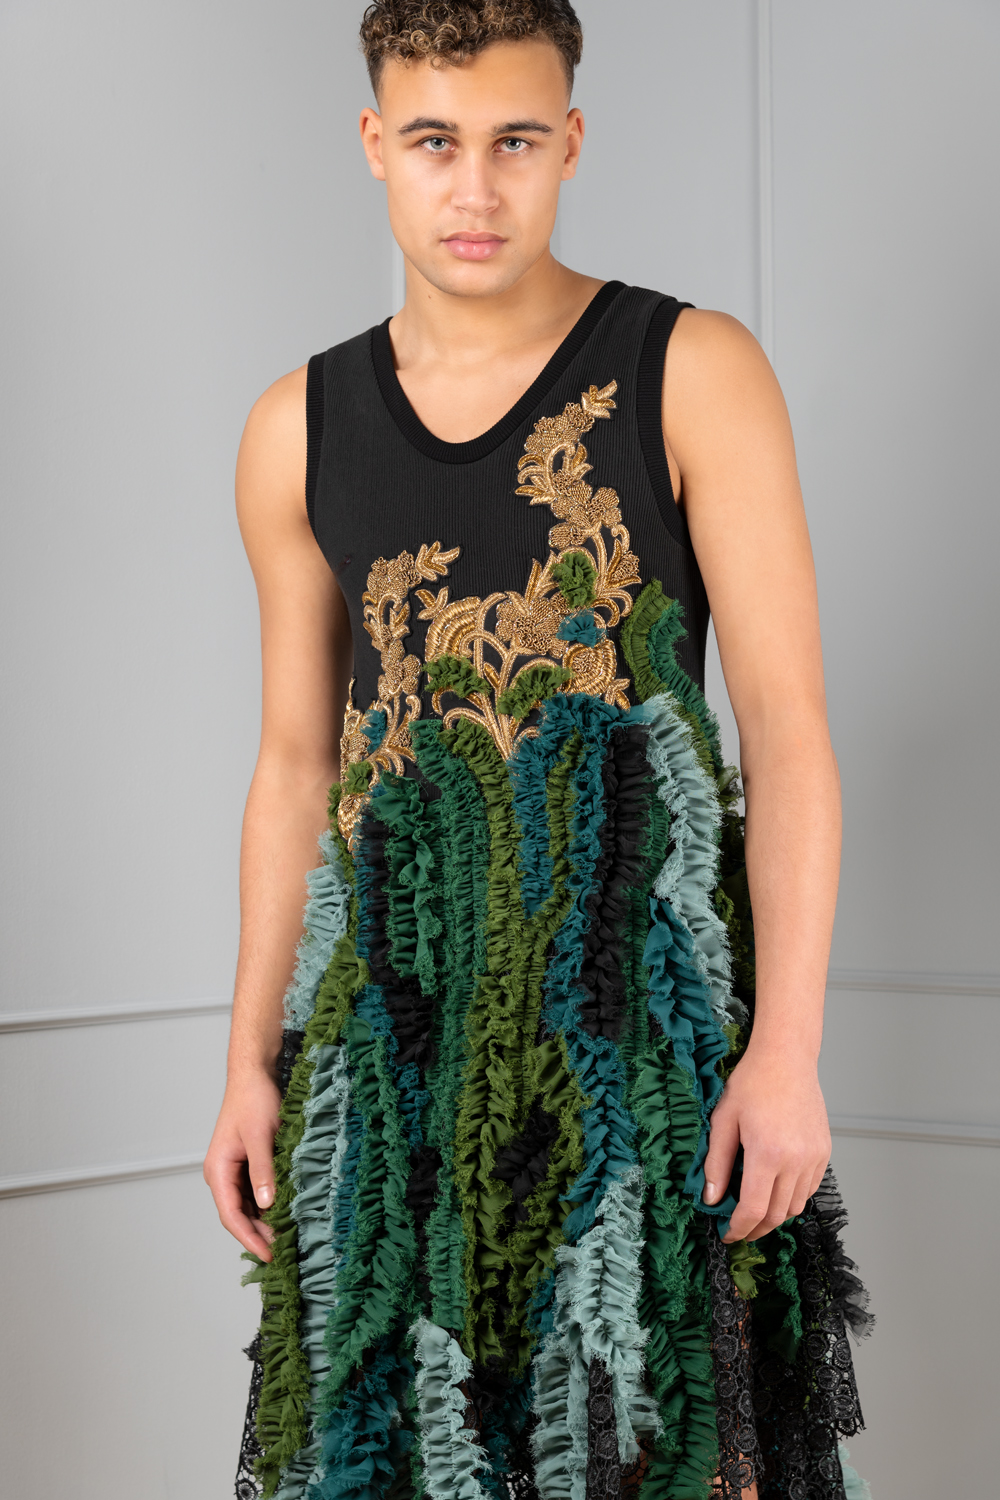 A black-and-green unisex dress | Haruco-vert